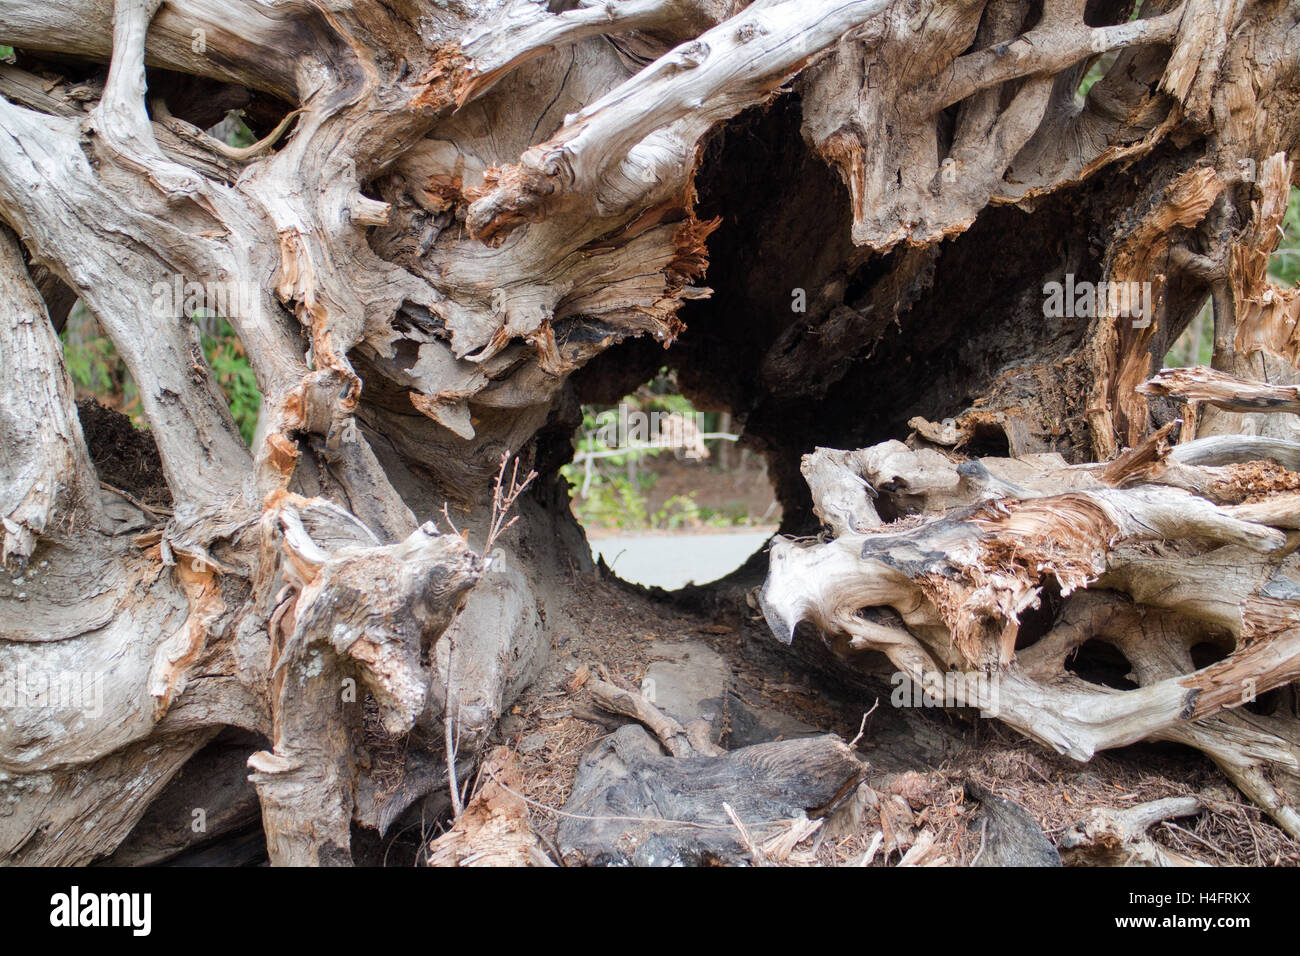 Looking through a piece of wood, art, art inspiration, nature inspiration, Vancouver Island Stock Photo